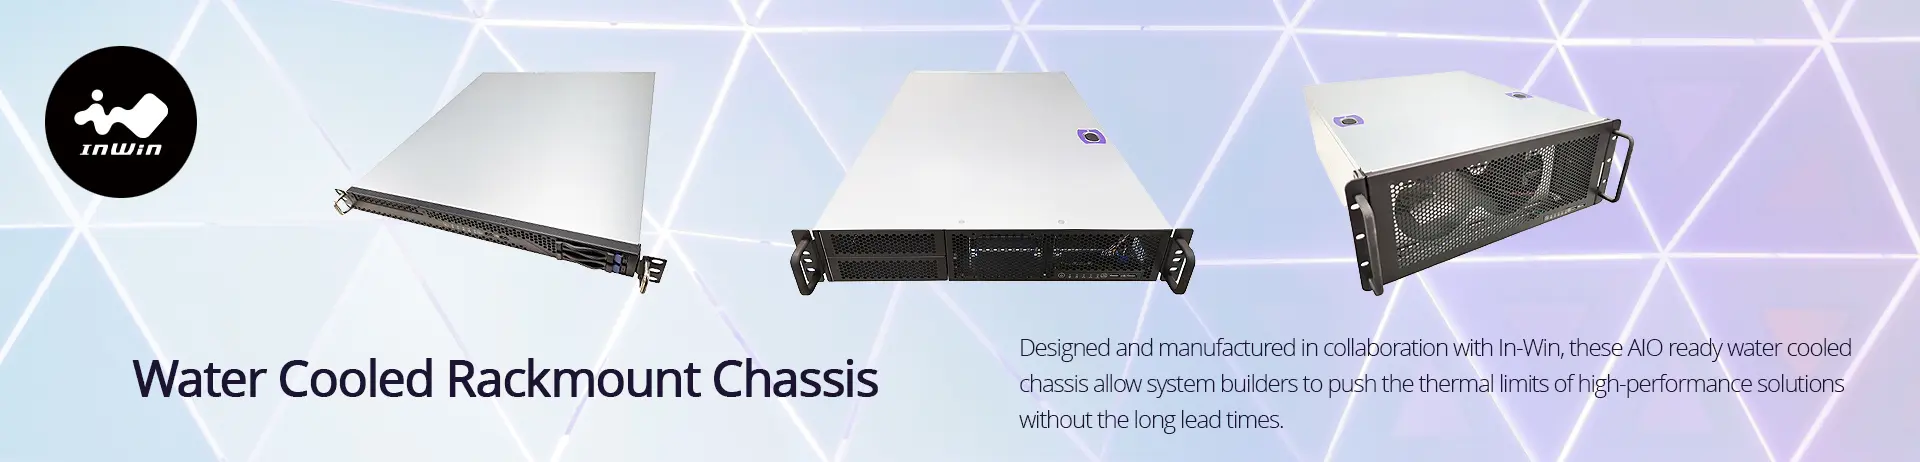 Water Cooled Server Chassis